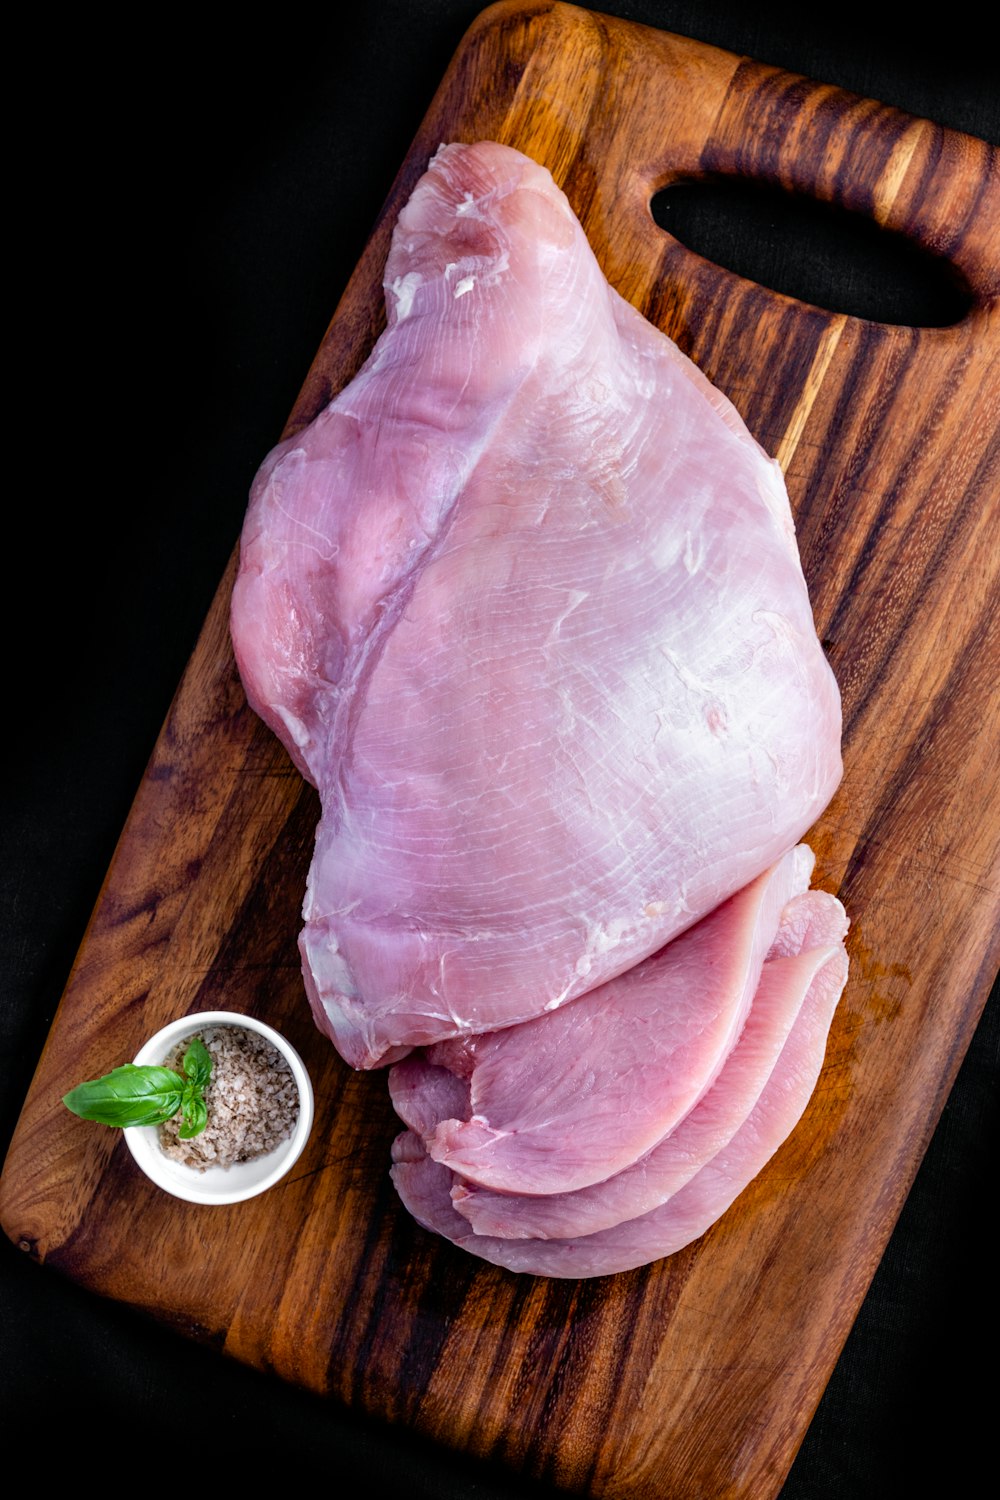 Raw Chicken Pictures | Download Free Images on Unsplash